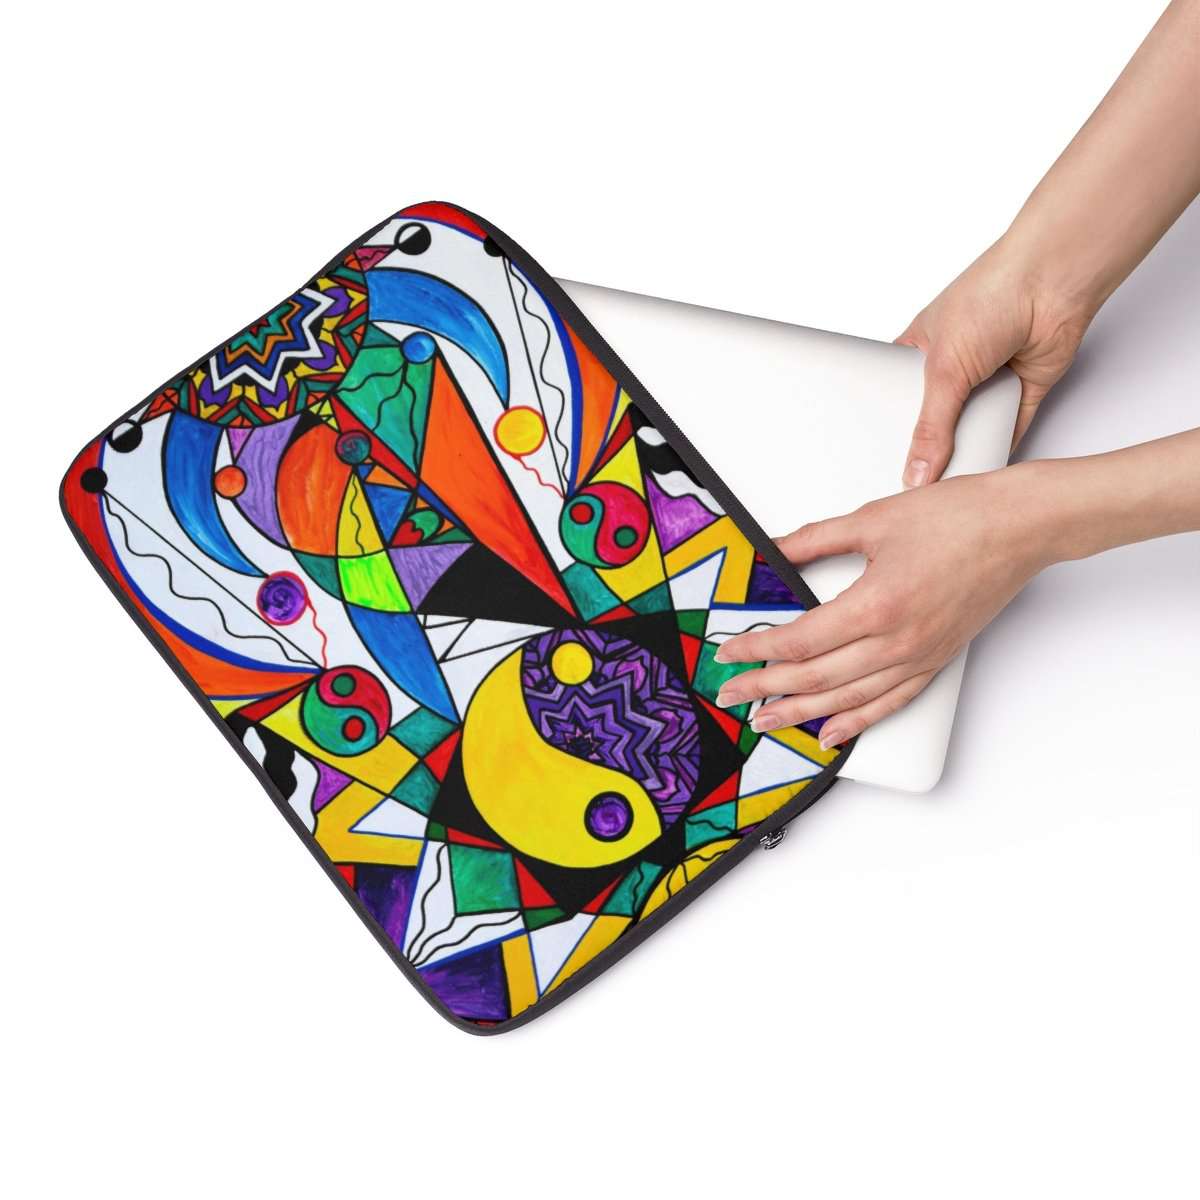 where-can-i-buy-compatibility-laptop-sleeve-online-now_3.jpg